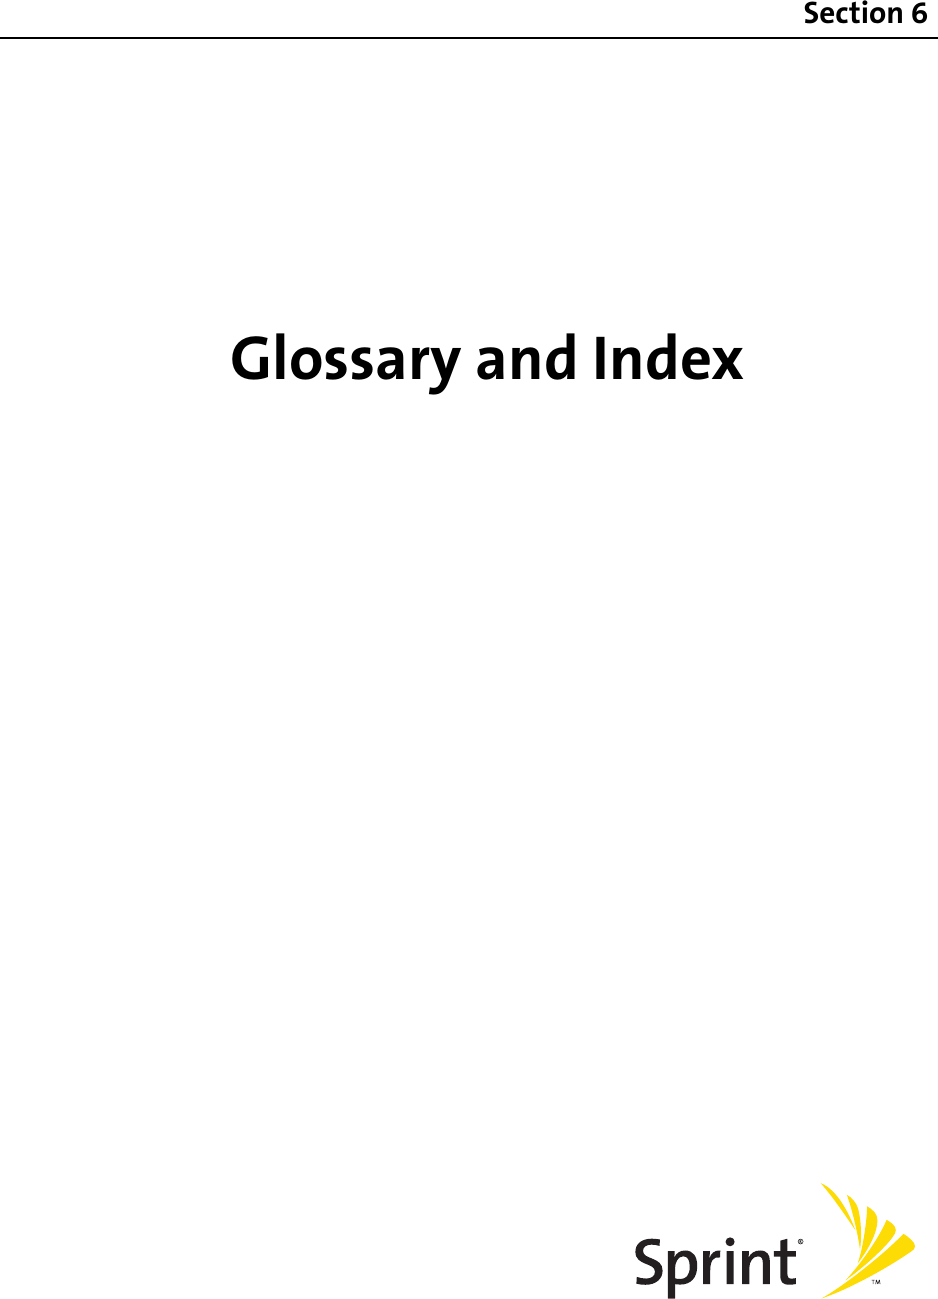 Glossary and IndexSection 6